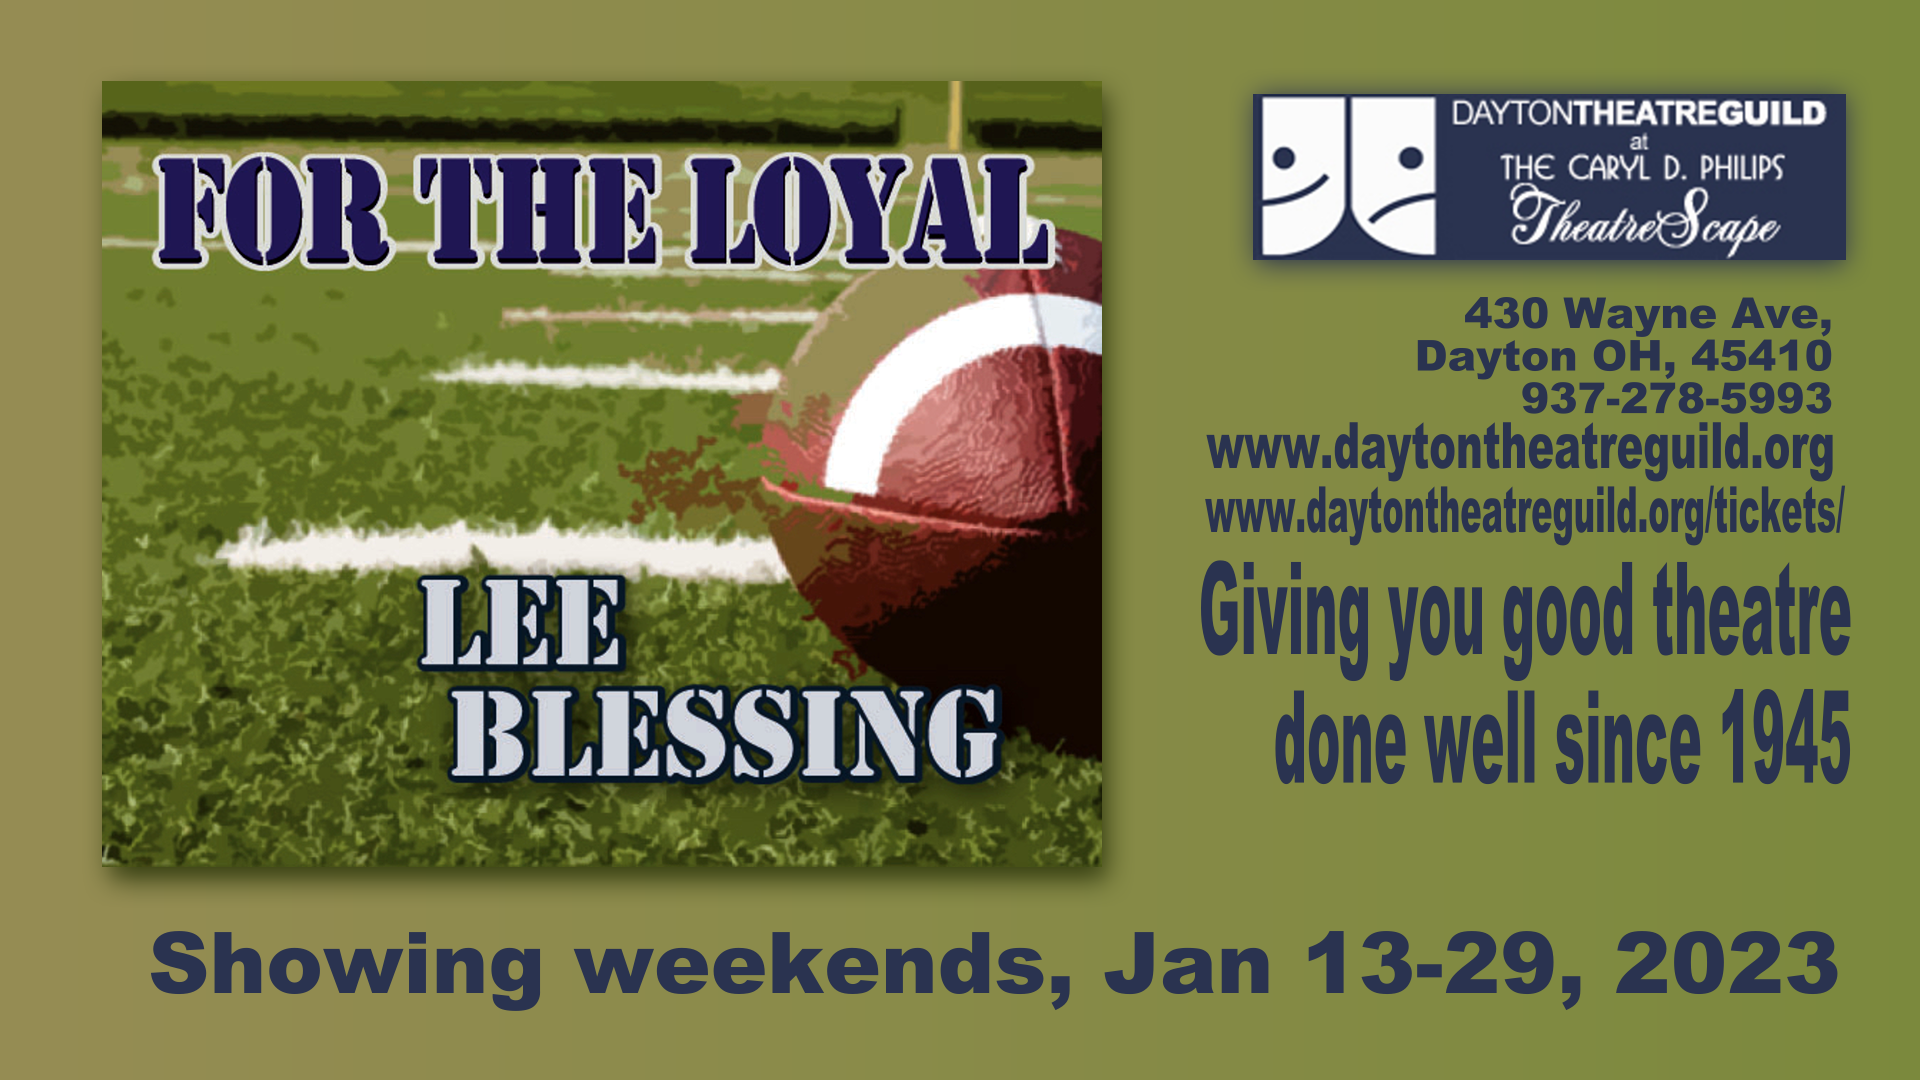 FOR THE LOYAL, by Lee Blessings.